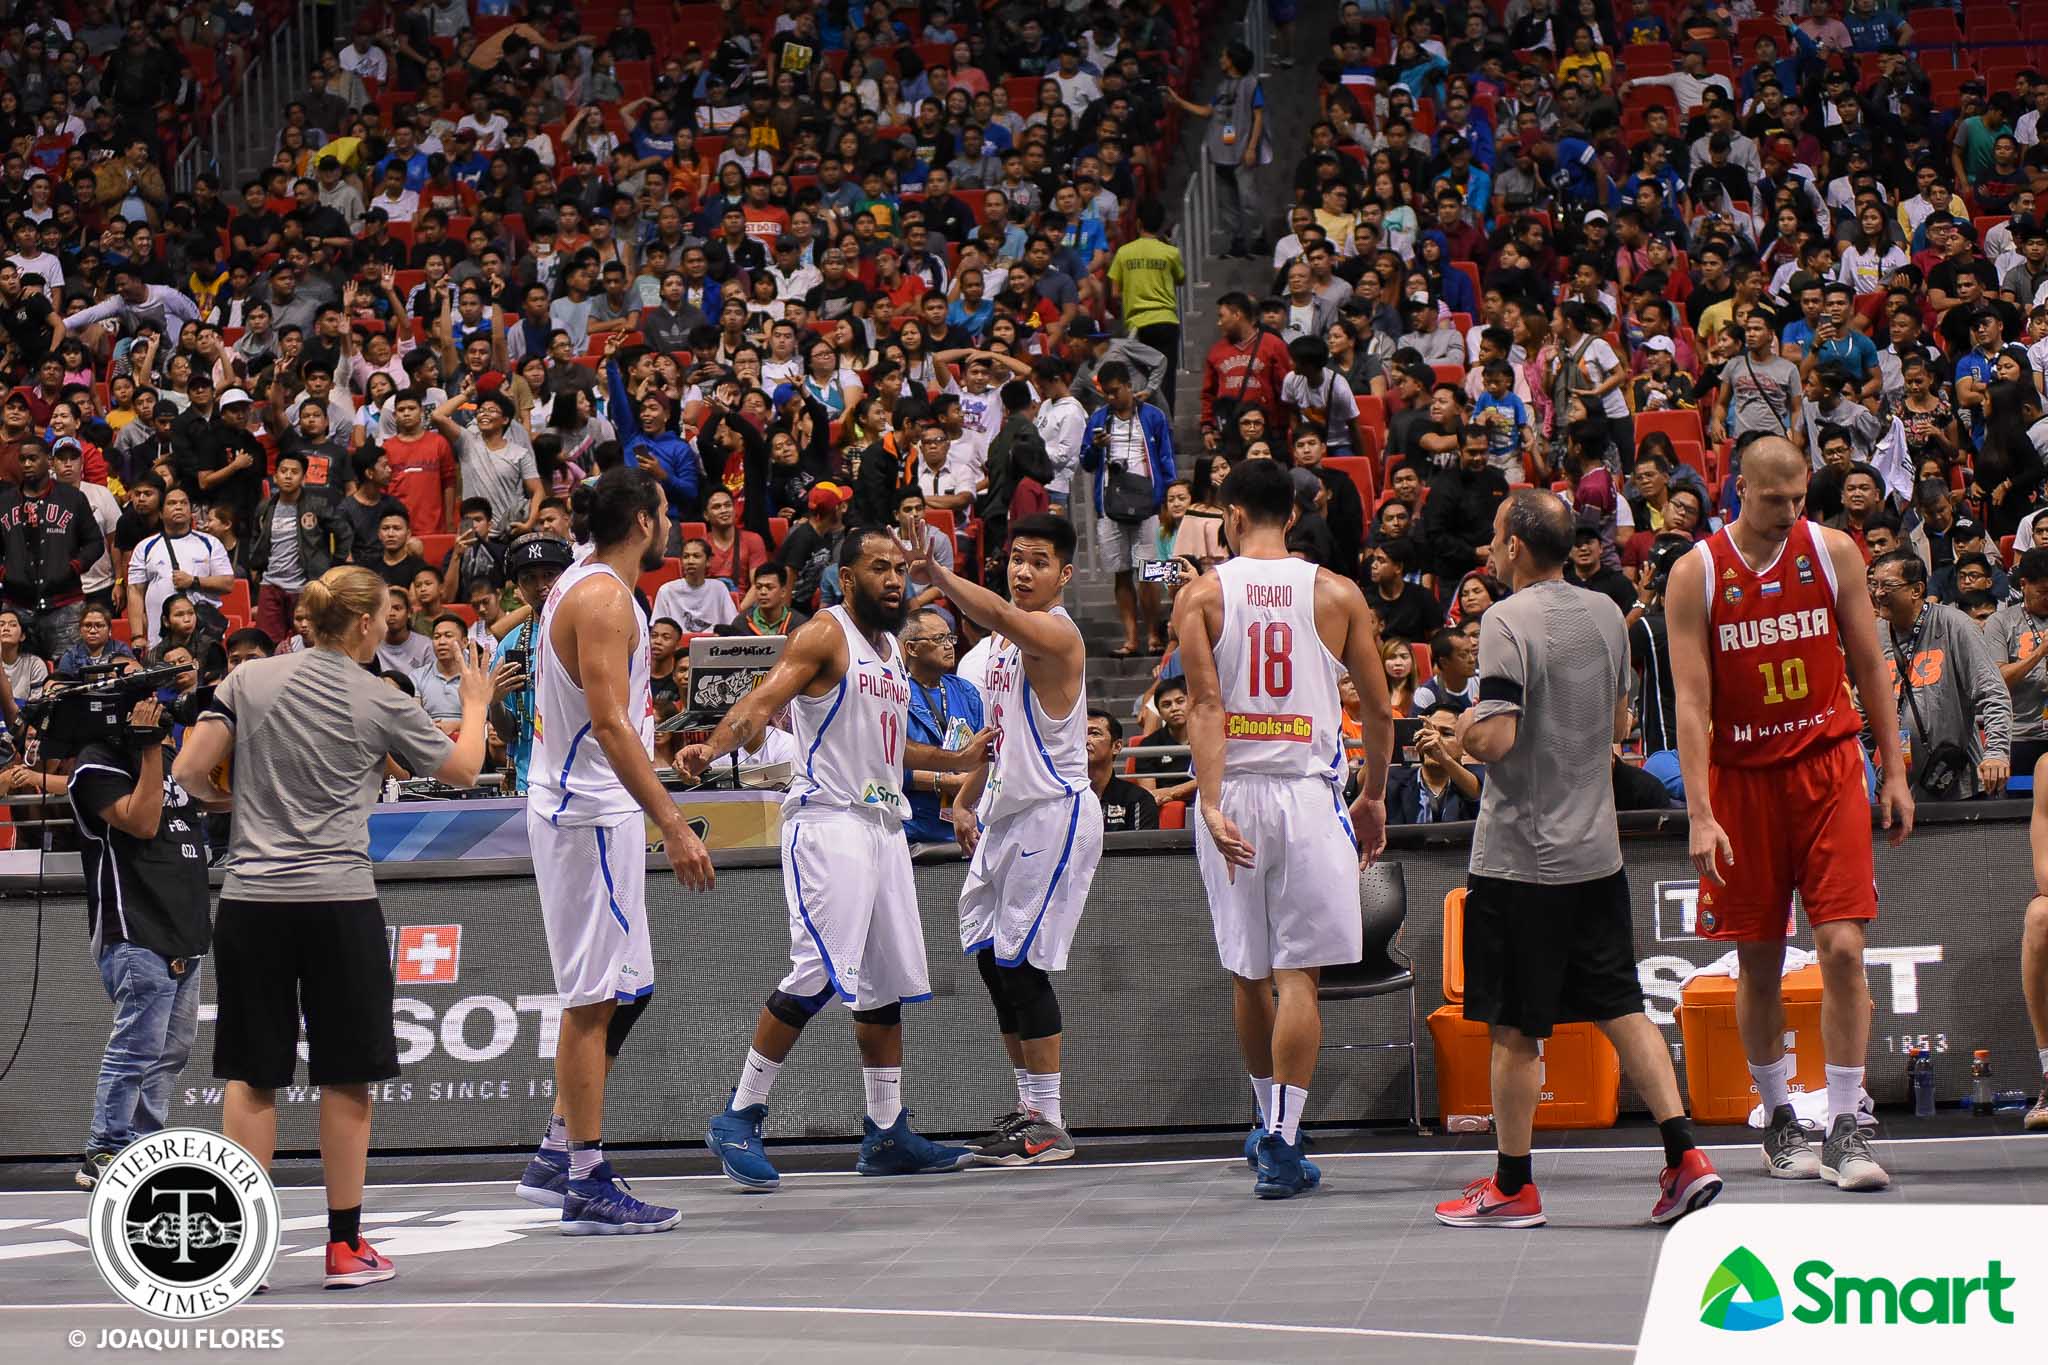 FIBA-3x3-World-Cup-Philippines-vs.-Russia-1115 Christian Standhardinger wants current Gilas 3x3 team to stick together 2018 FIBA 3X3 World Cup 3x3 Basketball Gilas Pilipinas News  - philippine sports news